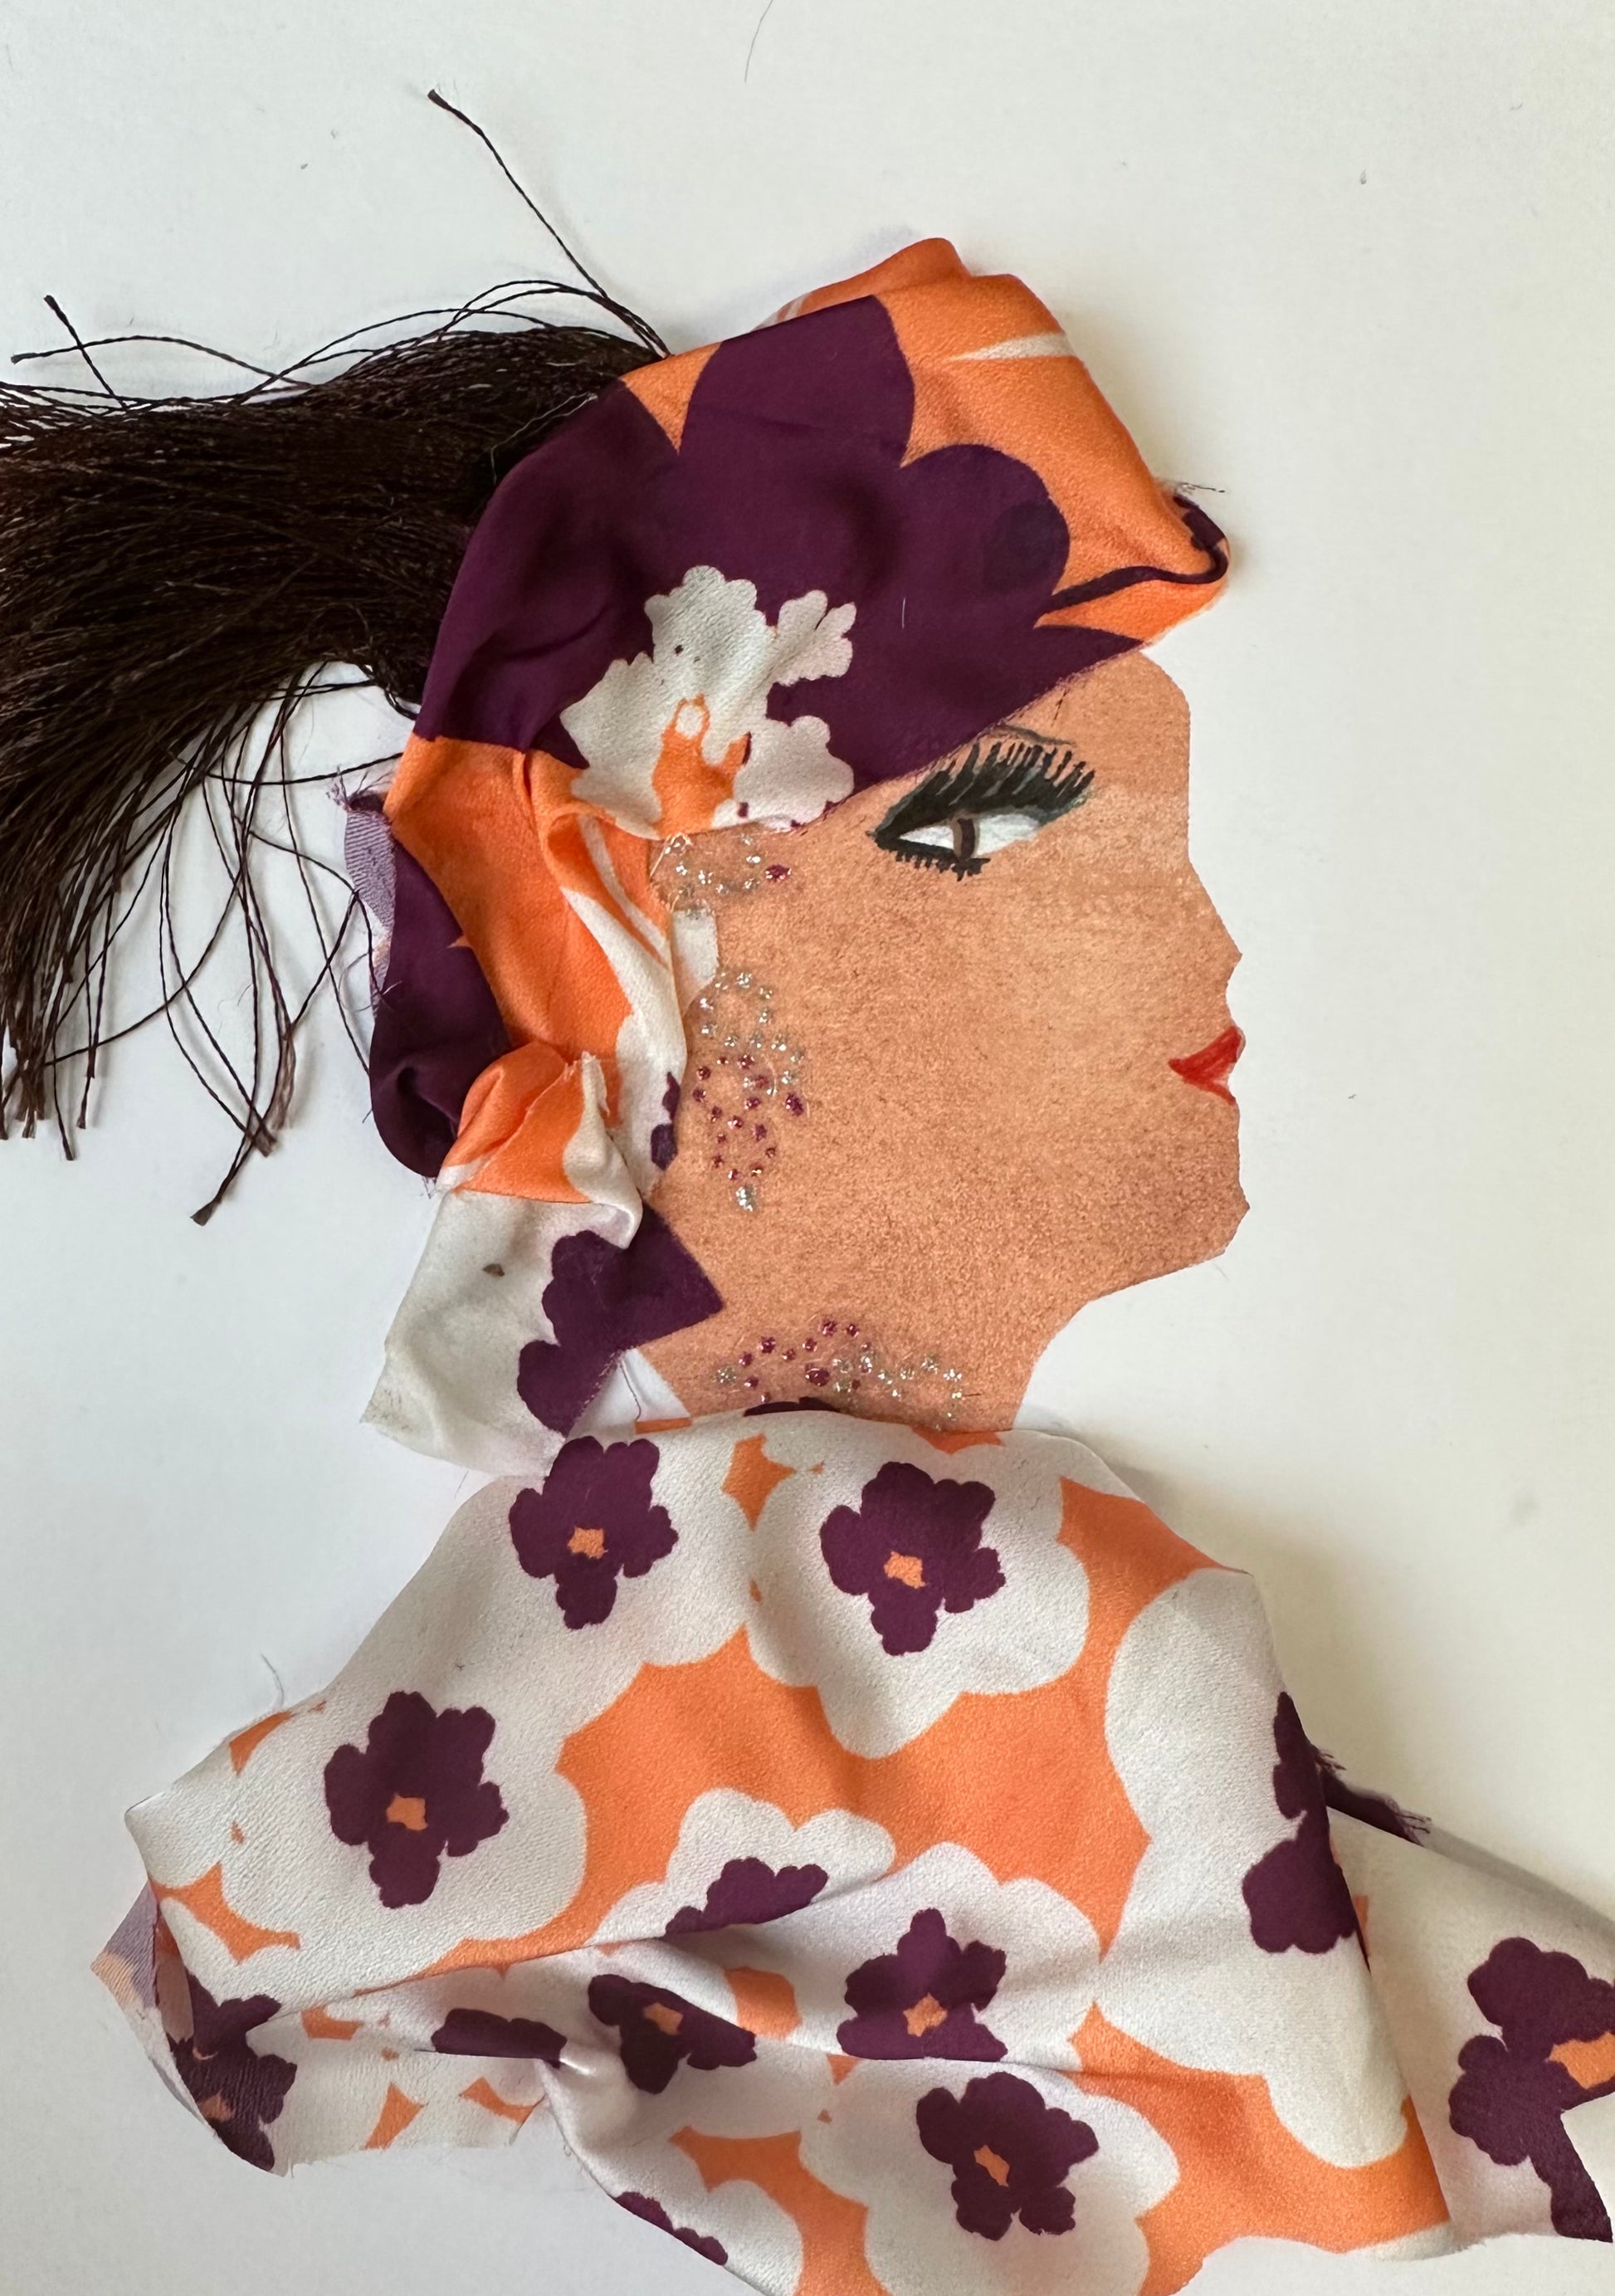 I designed this handmade card of a woman dressed in a purple, orange, and white floral blouse and hatinator. Her hair is held together by the hatinator, and her jewellery is composed of small gemstones.